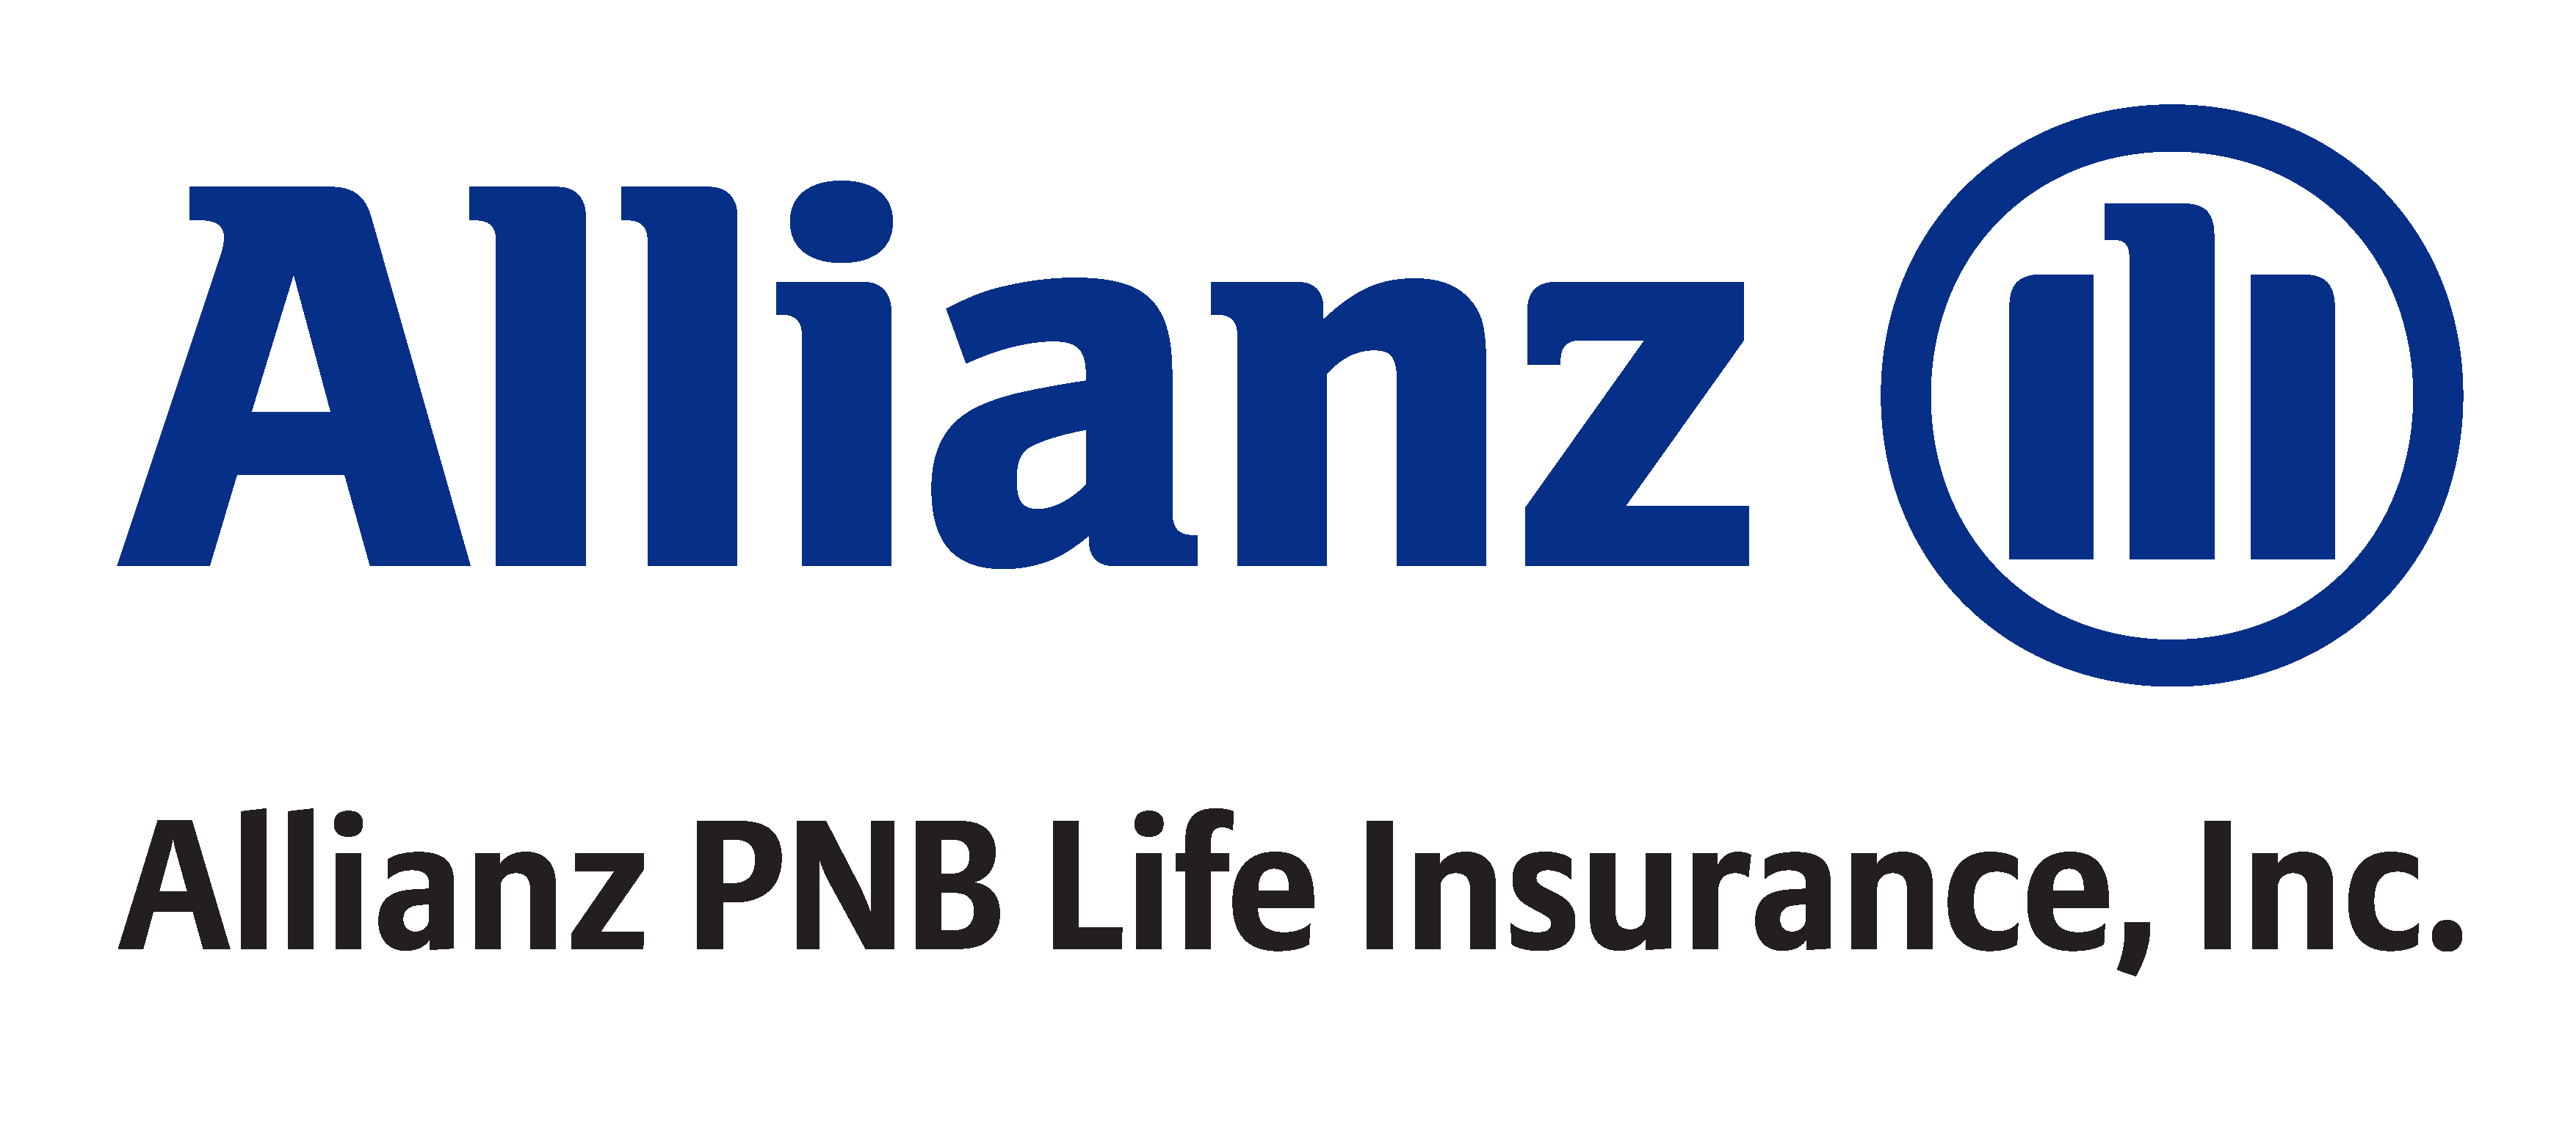 Allianz PNB Life Customers to get free access to Allianz Healthbox Perks, including unlimited teleconsultation